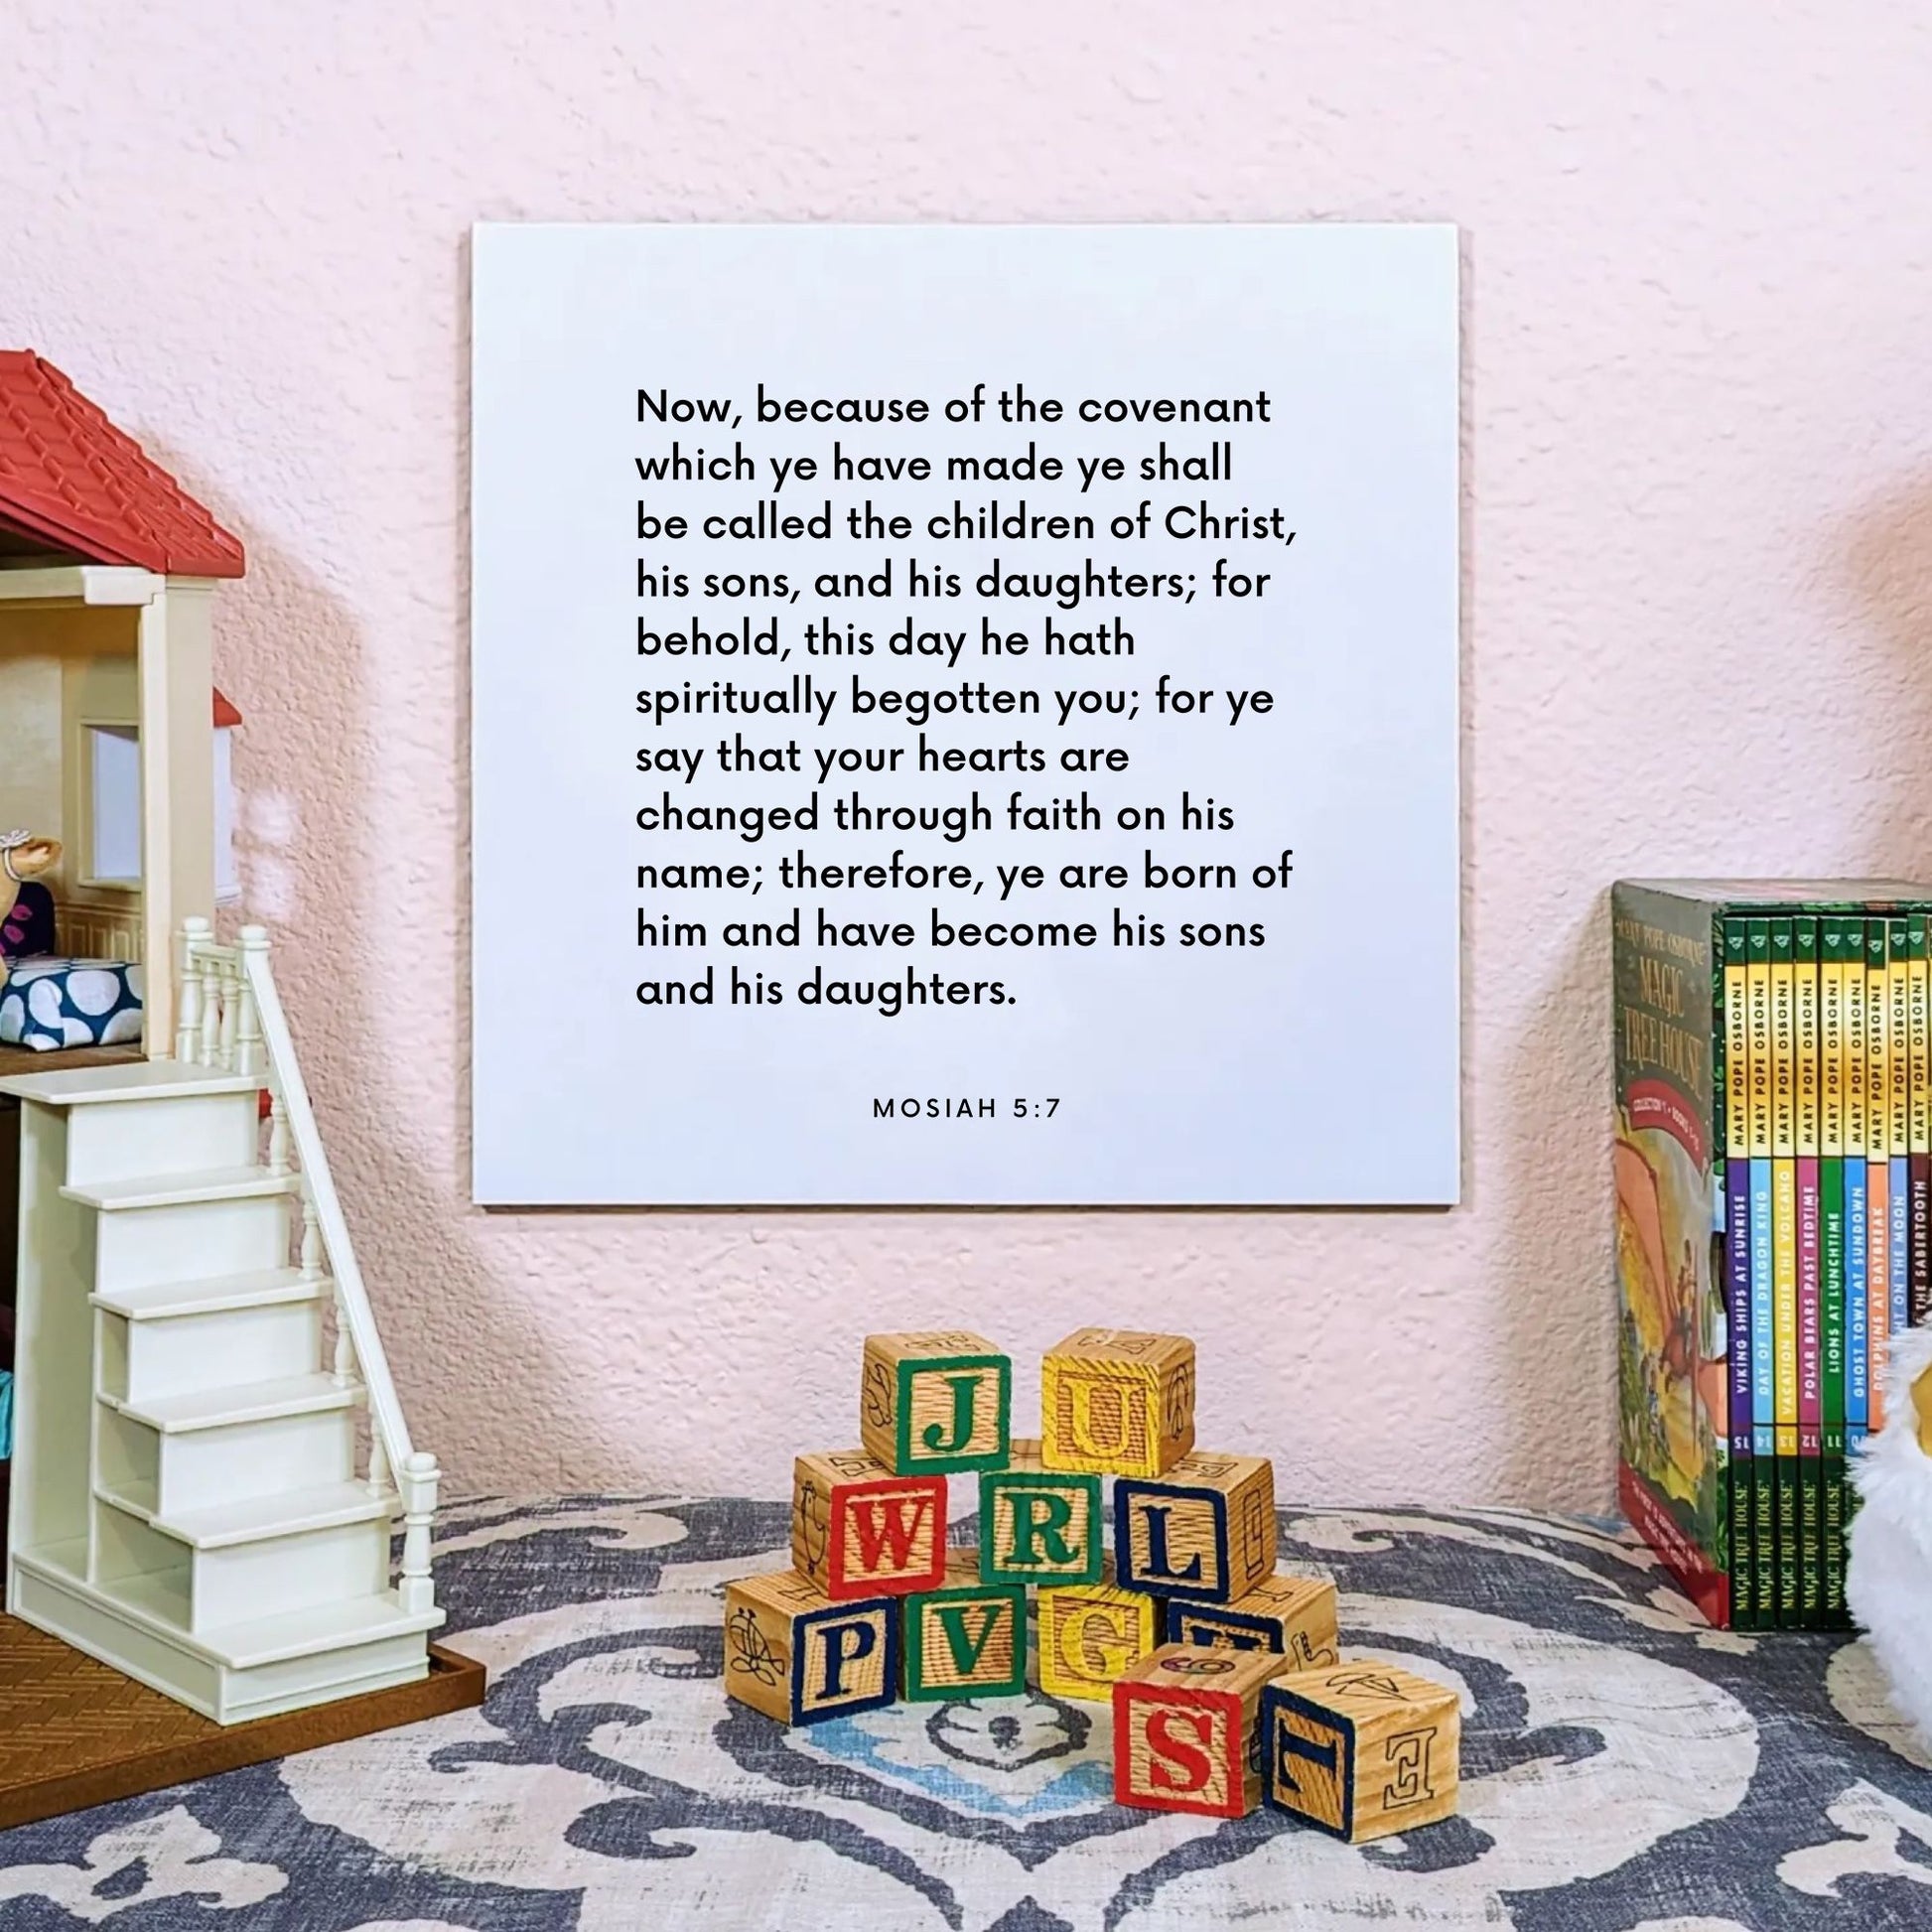 Playroom mouting of the scripture tile for Mosiah 5:7 - "This day he hath spiritually begotten you"